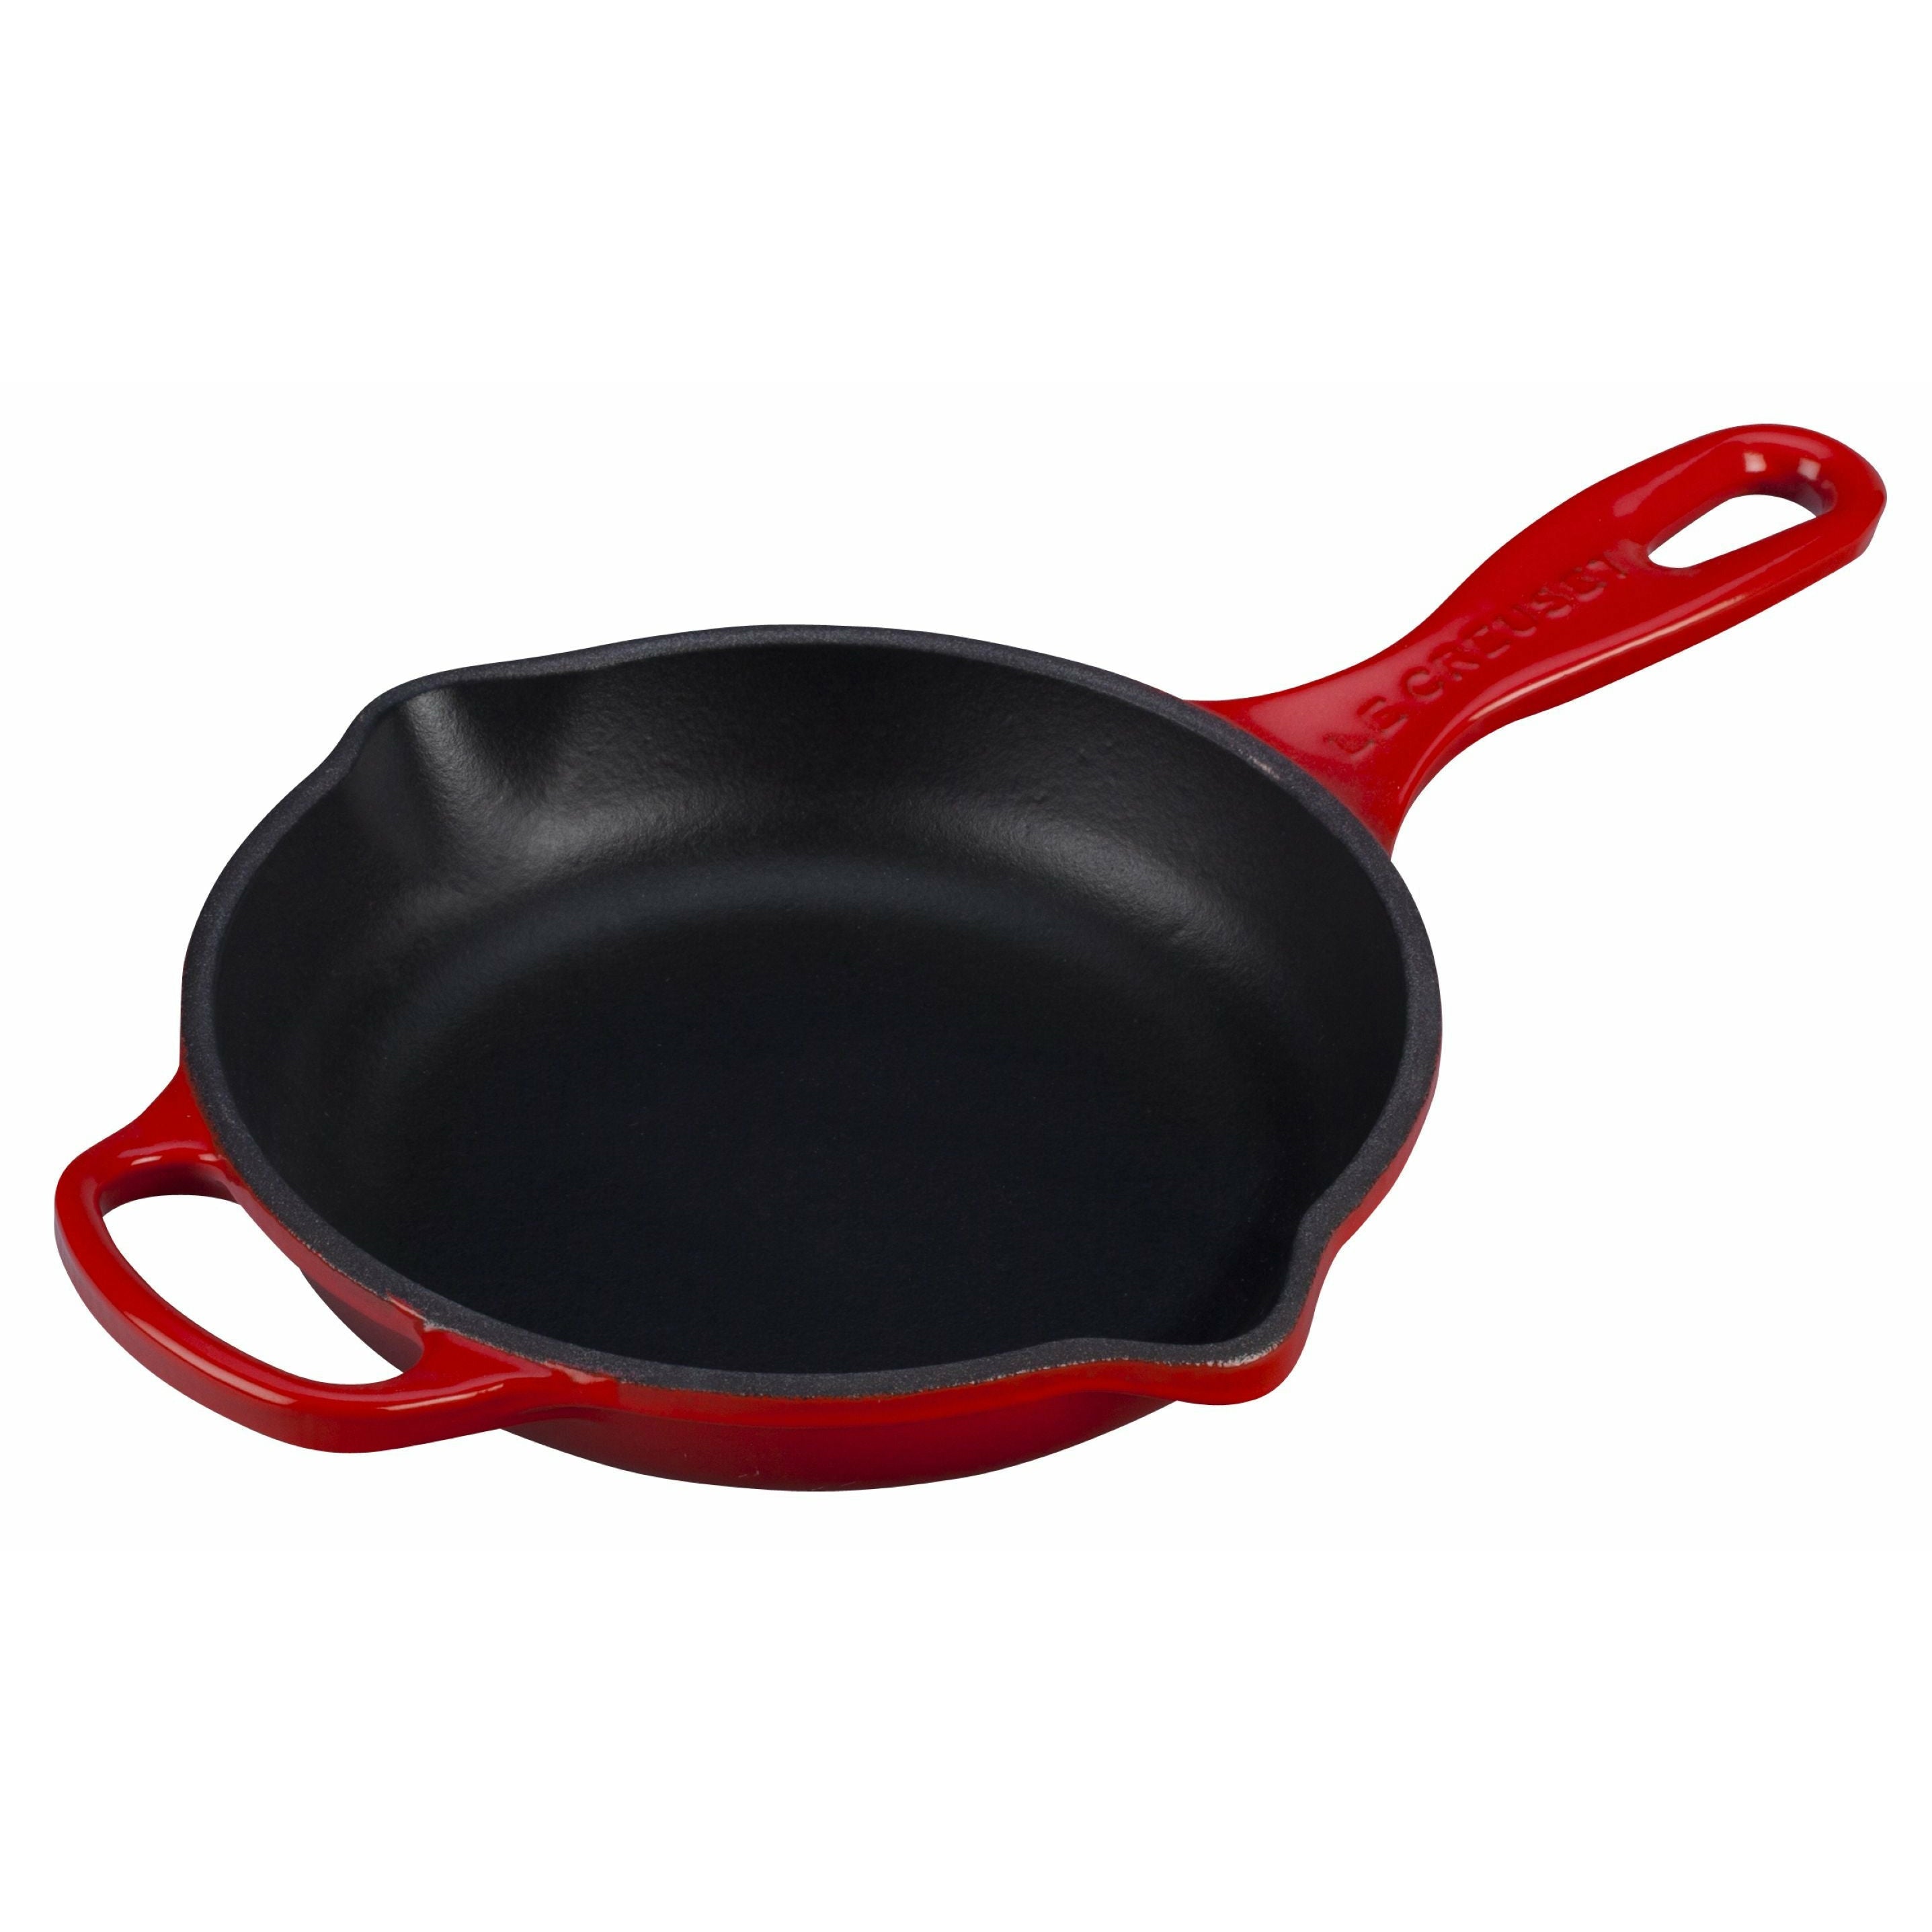 Le Creuset Signature Round Round Friting and Serving Pan 16 cm, Cherry Red